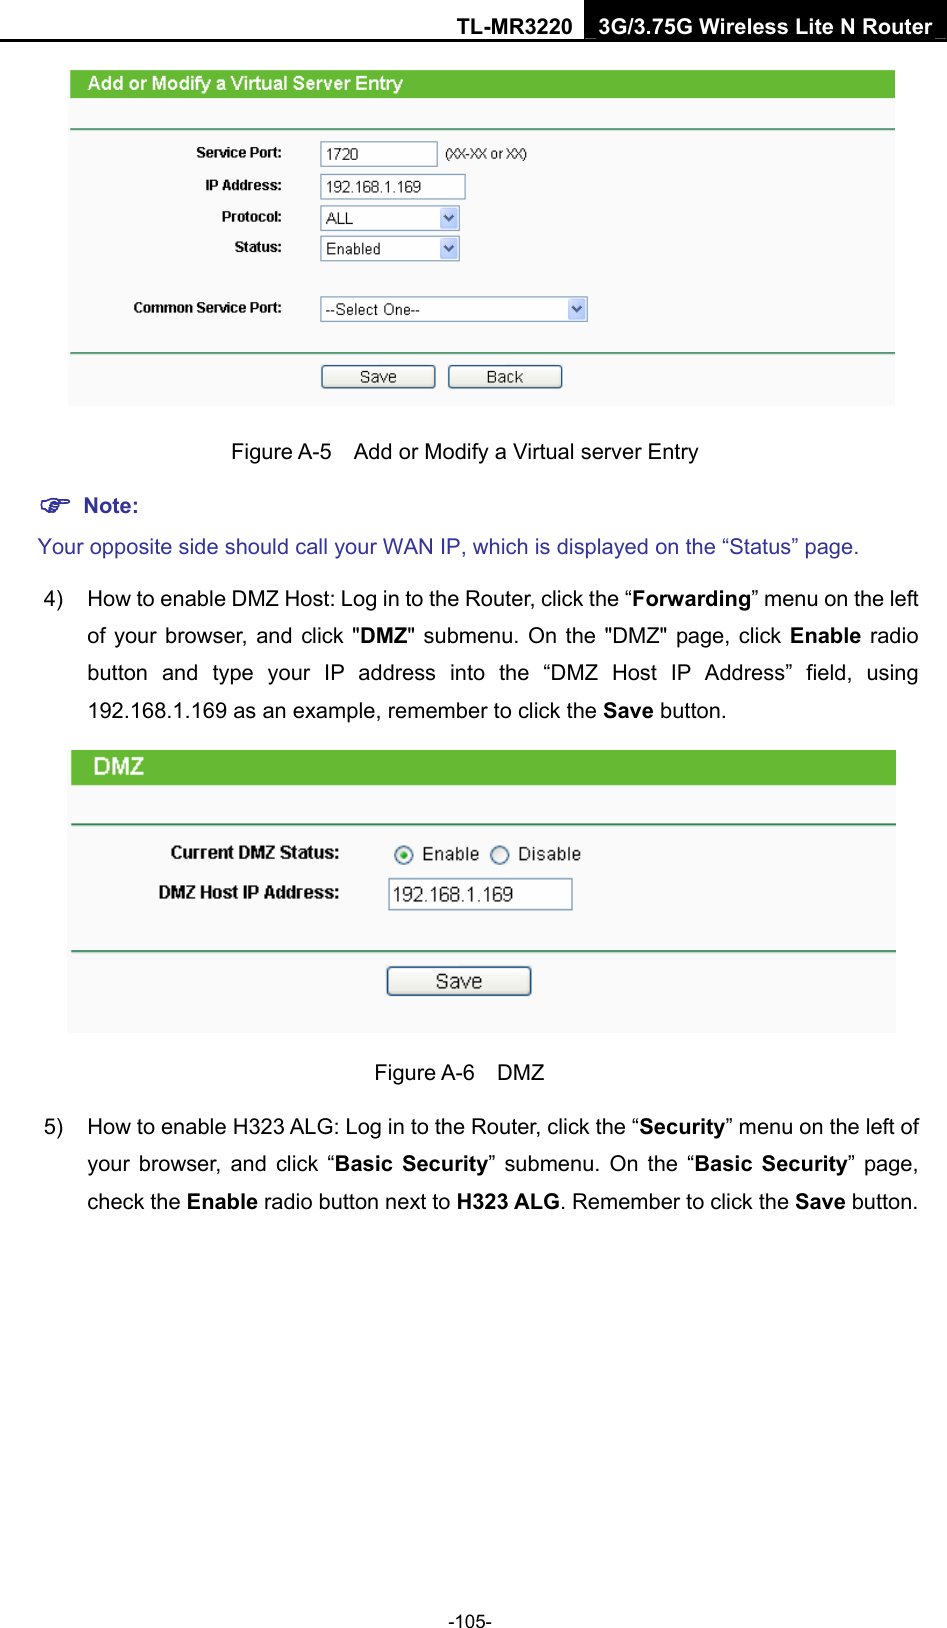 TL-MR3220 3G/3.75G Wireless Lite N Router -105-    Figure A-5    Add or Modify a Virtual server Entry ) Note: Your opposite side should call your WAN IP, which is displayed on the “Status” page. 4)  How to enable DMZ Host: Log in to the Router, click the “Forwarding” menu on the left of your browser, and click &quot;DMZ&quot; submenu. On the &quot;DMZ&quot; page, click Enable radio button and type your IP address into the “DMZ Host IP Address” field, using 192.168.1.169 as an example, remember to click the Save button.    Figure A-6  DMZ 5)  How to enable H323 ALG: Log in to the Router, click the “Security” menu on the left of your browser, and click “Basic Security” submenu. On the “Basic Security” page, check the Enable radio button next to H323 ALG. Remember to click the Save button. 